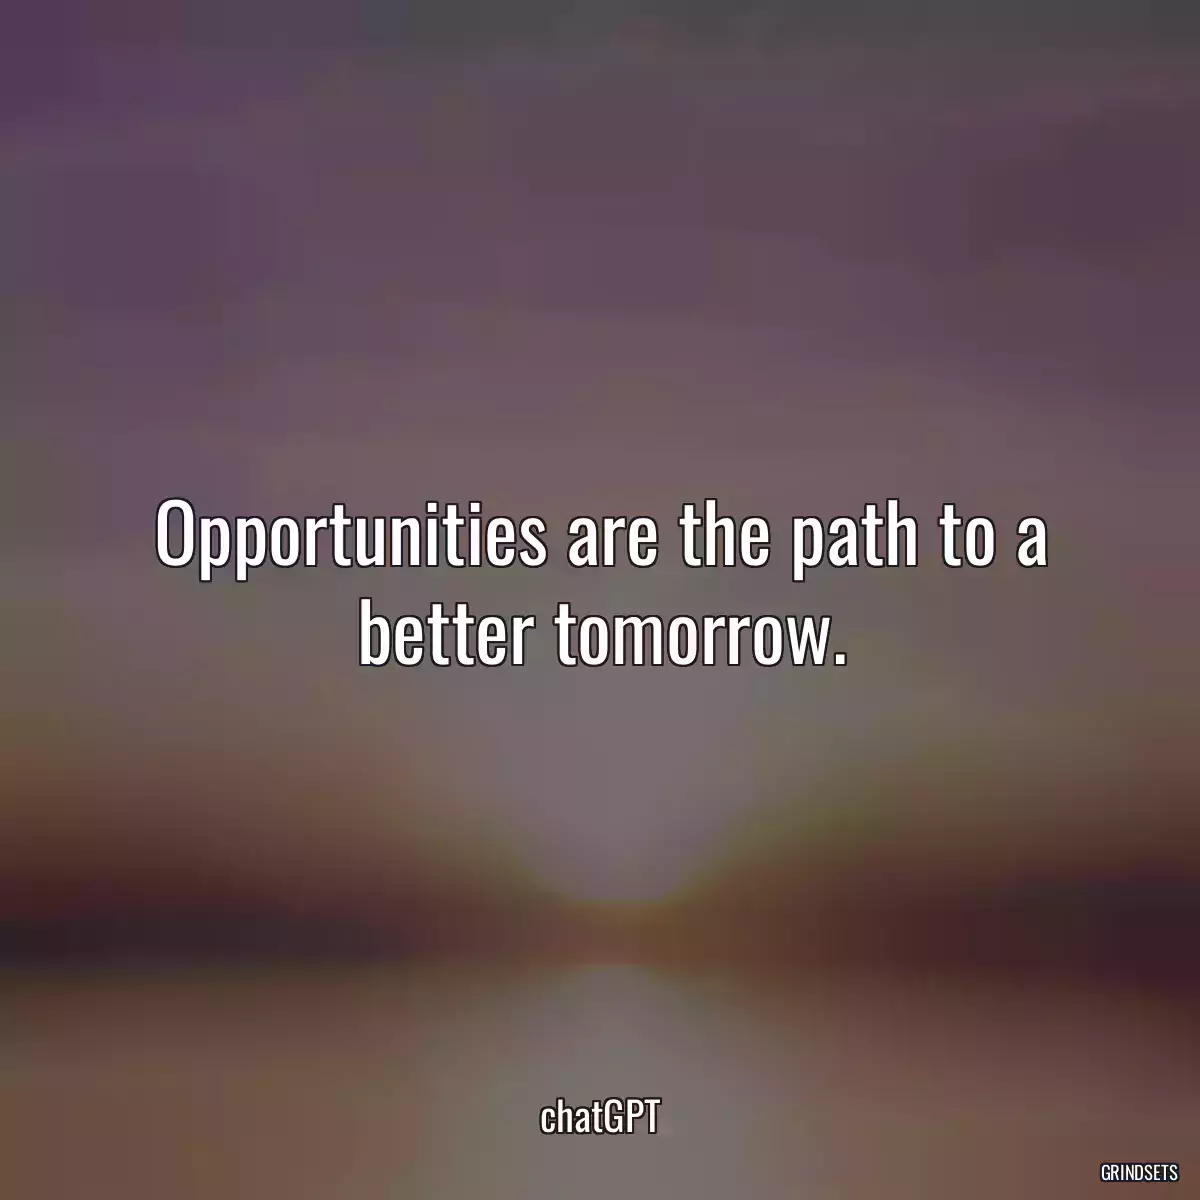 Opportunities are the path to a better tomorrow.